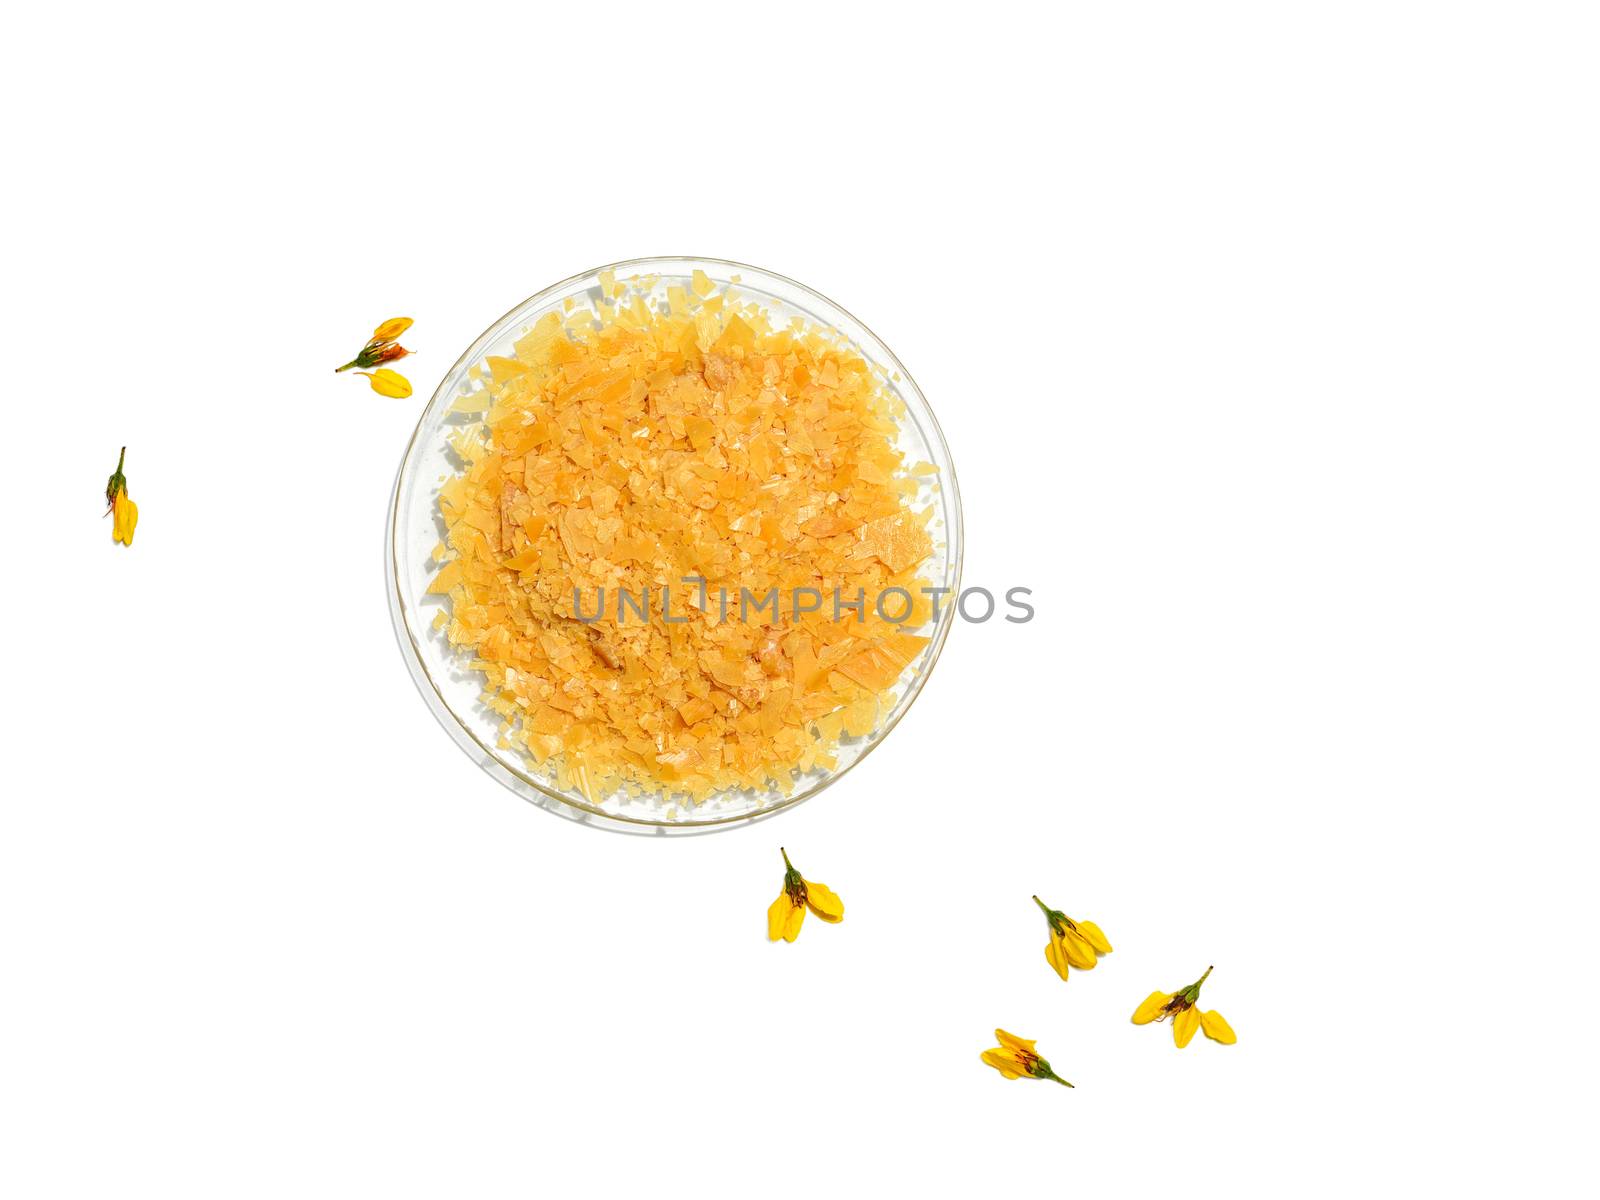 Organic Carnauba Wax comes in the form of hard yellow flakes by chadchai_k